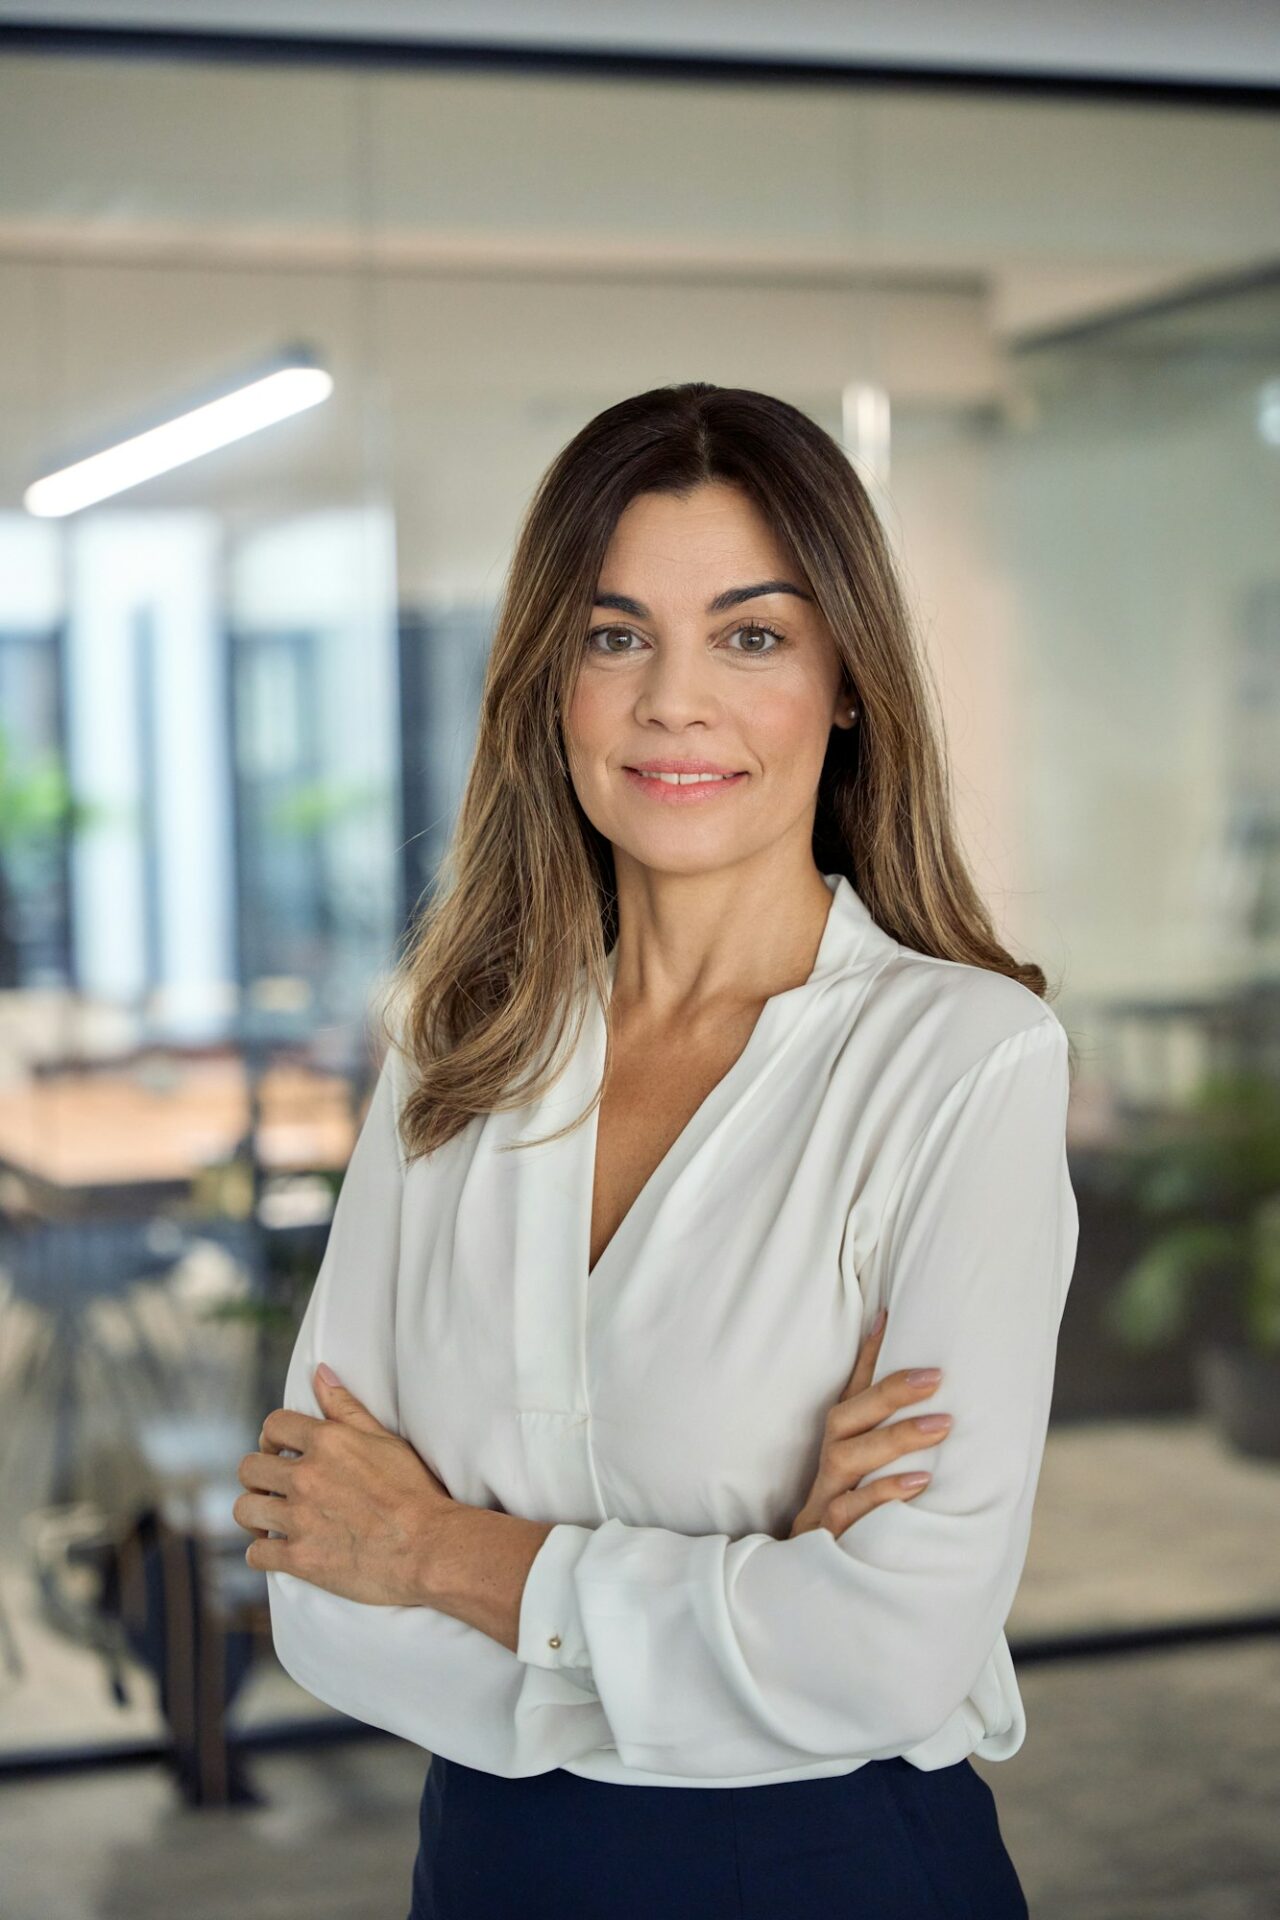 Smiling confident Latin professional mature business woman in office, portrait.